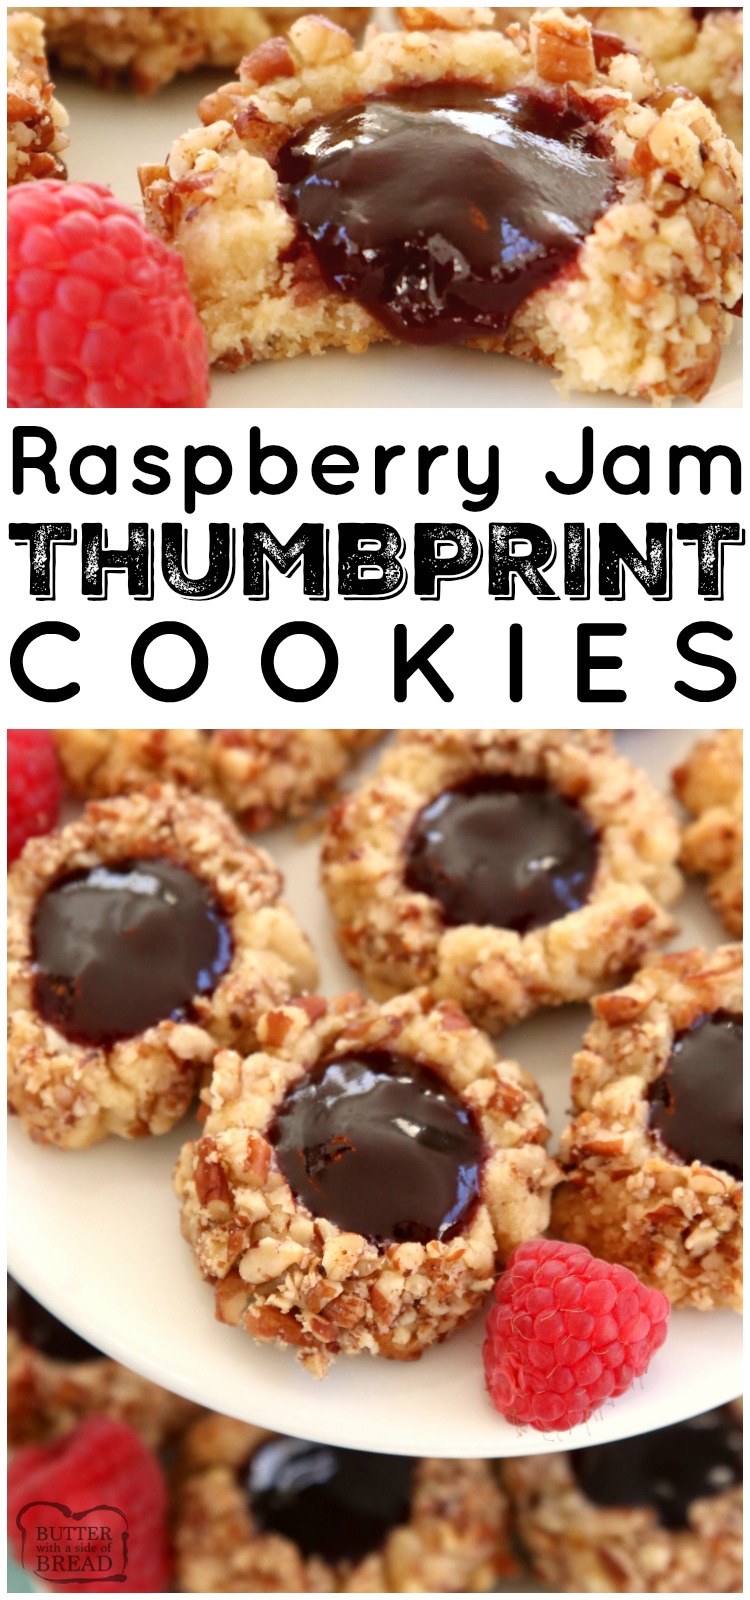 Raspberry Jam Thumbprint Cookies are a classic shortbread cookie rolled in pecans, baked & filled with sweet raspberry jam. Buttery Christmas cookie recipe that everyone looks forward to for holiday cookie exchanges! #Cookies #thumbprint #baking #Christmas #holidays #raspberry #jam #thumbprintcookies #recipe #dessert from BUTTER WITH A SIDE OF BREAD